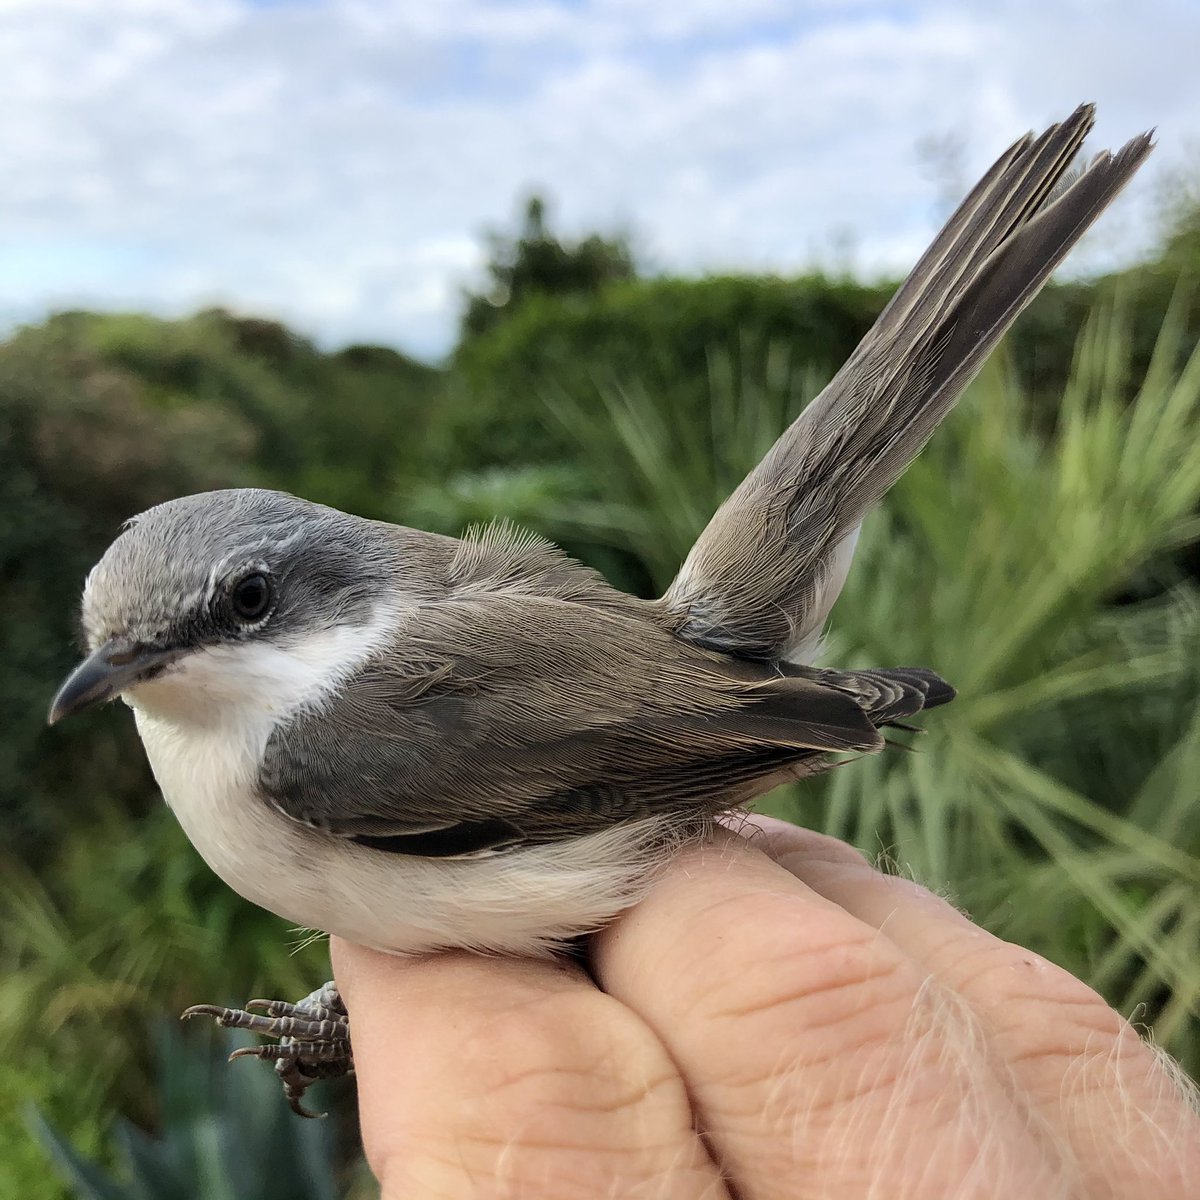 Nice to catch one more of these in the garden before the season’s over. #LesserWhitethroat #BirdRinging